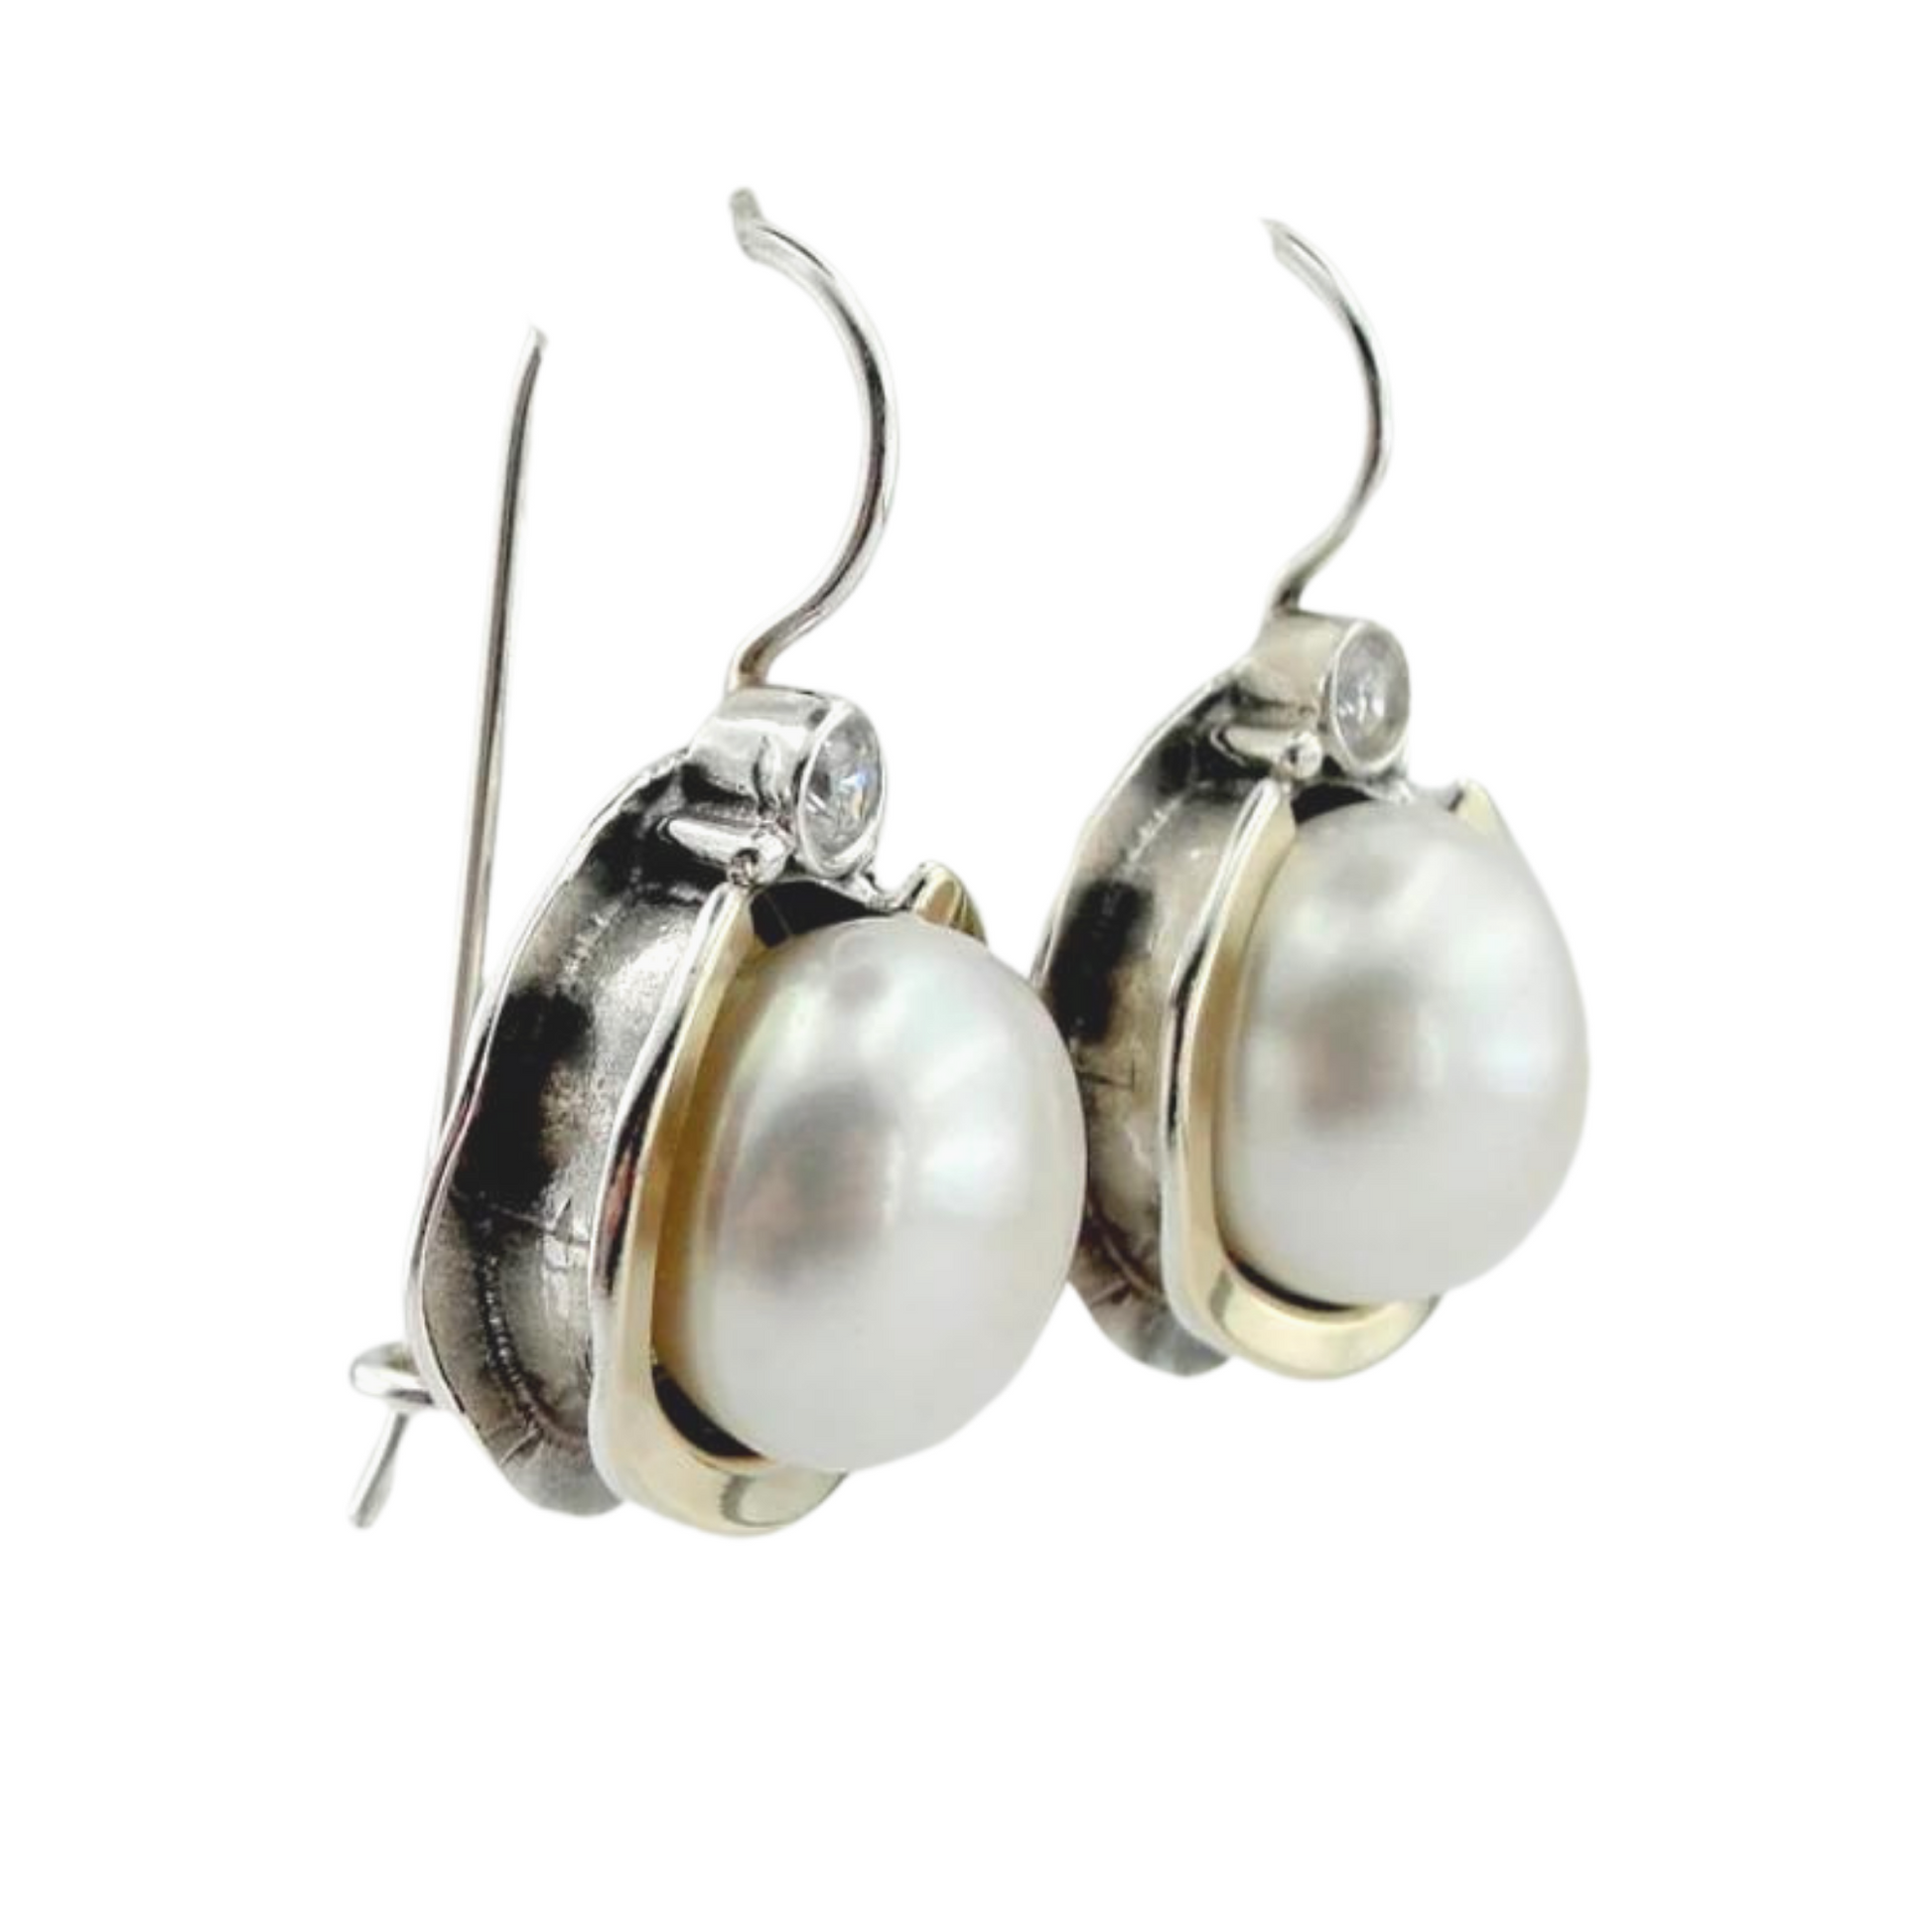 Big pearls Dangle Earrings Decorated with Yellow Gold, Sterling Silver Earrings, silver and gold earrings, Natural Pearls earrings, Gold earrings, dangling gold earrings, Pearls Earrings, Zircon Earrings, Israeli Jewelry, Israeli design, gift for mom